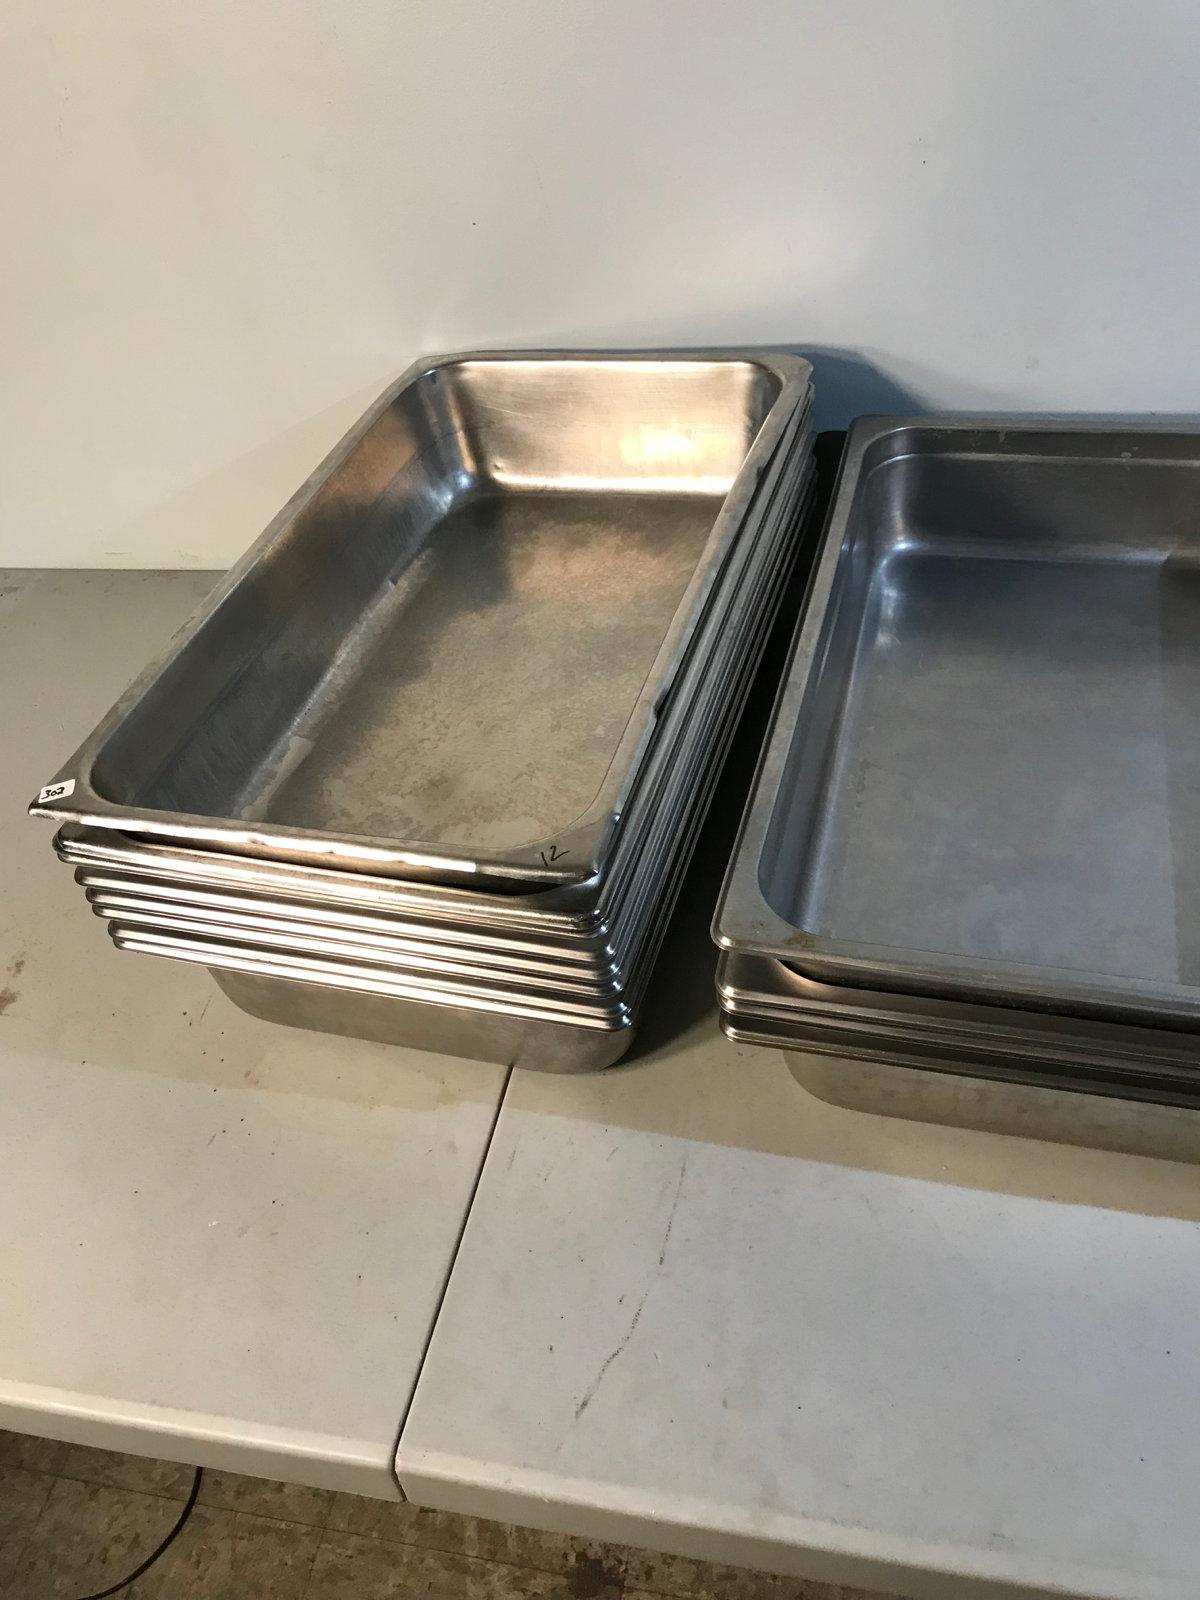 Steam table pans, full size